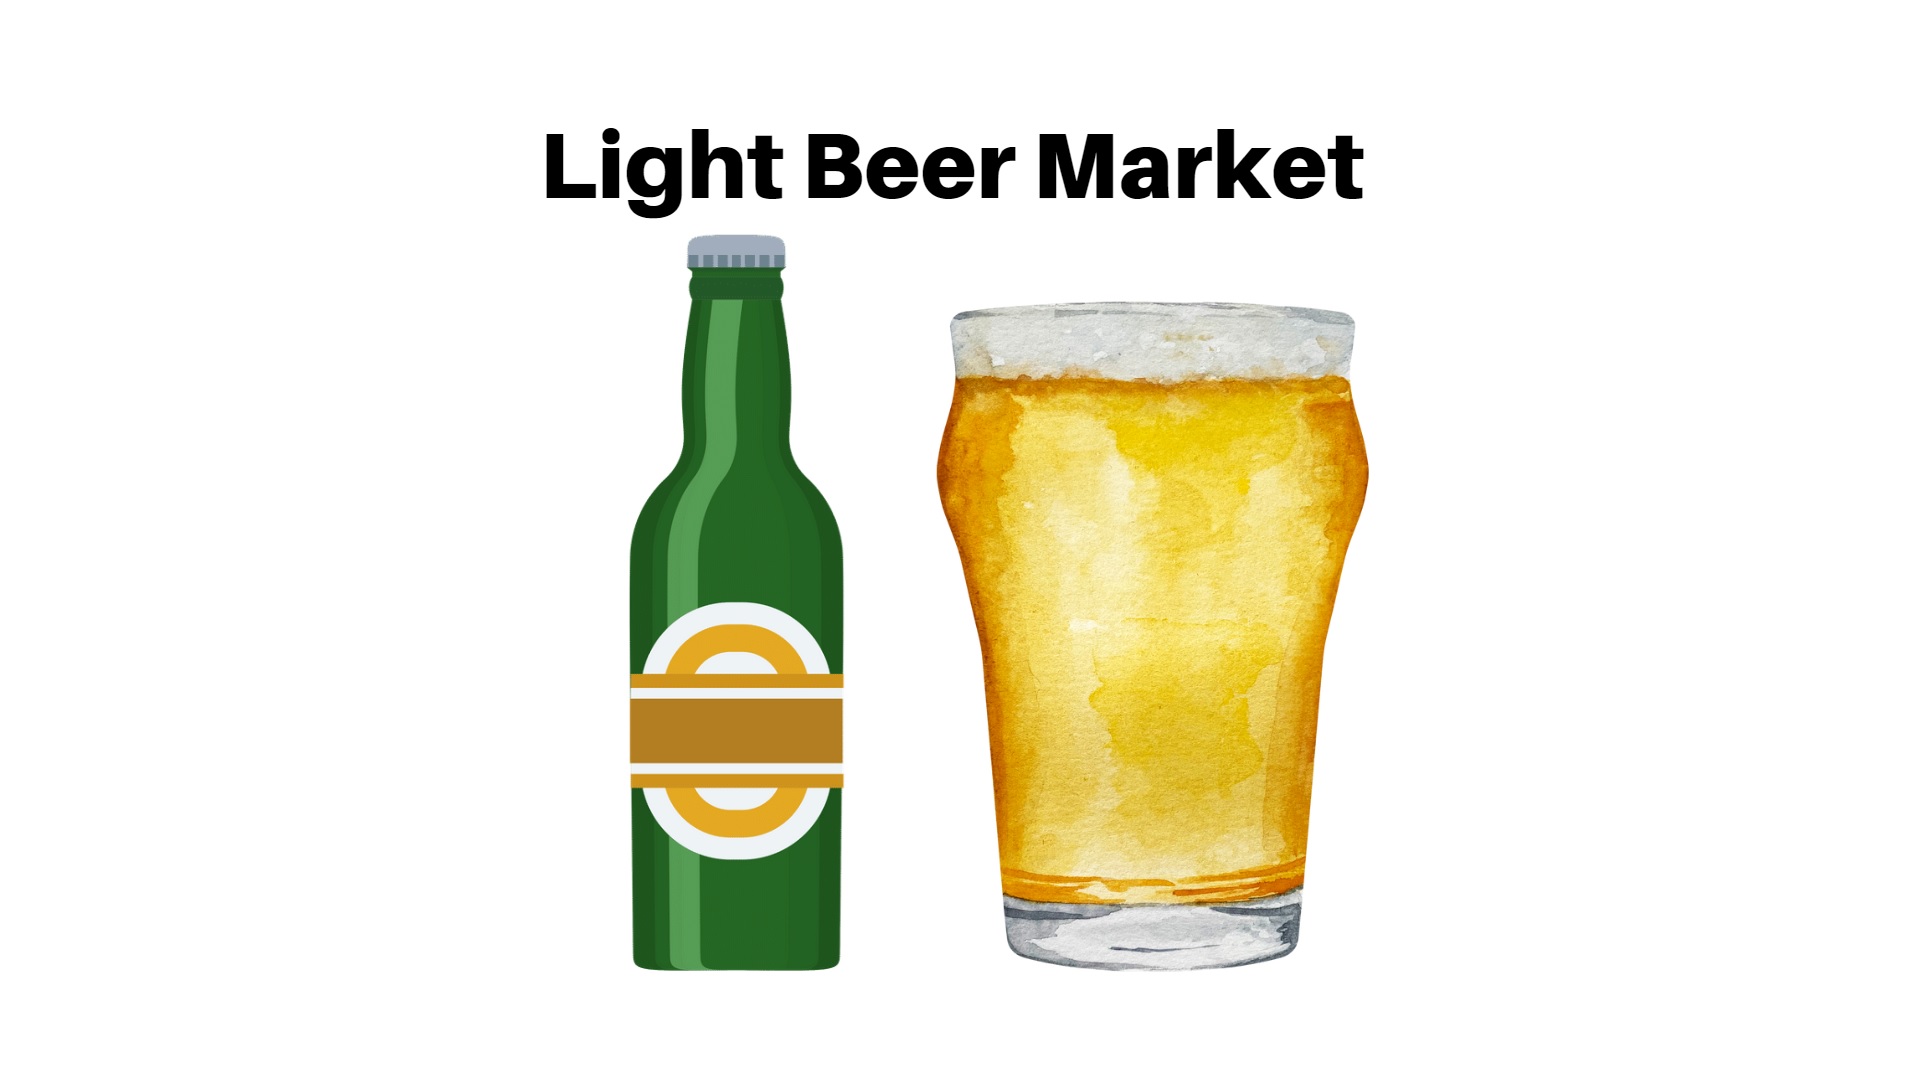 Light Beer Market to Reach USD 386.9 billion by 2032 | CAGR of 2.5%